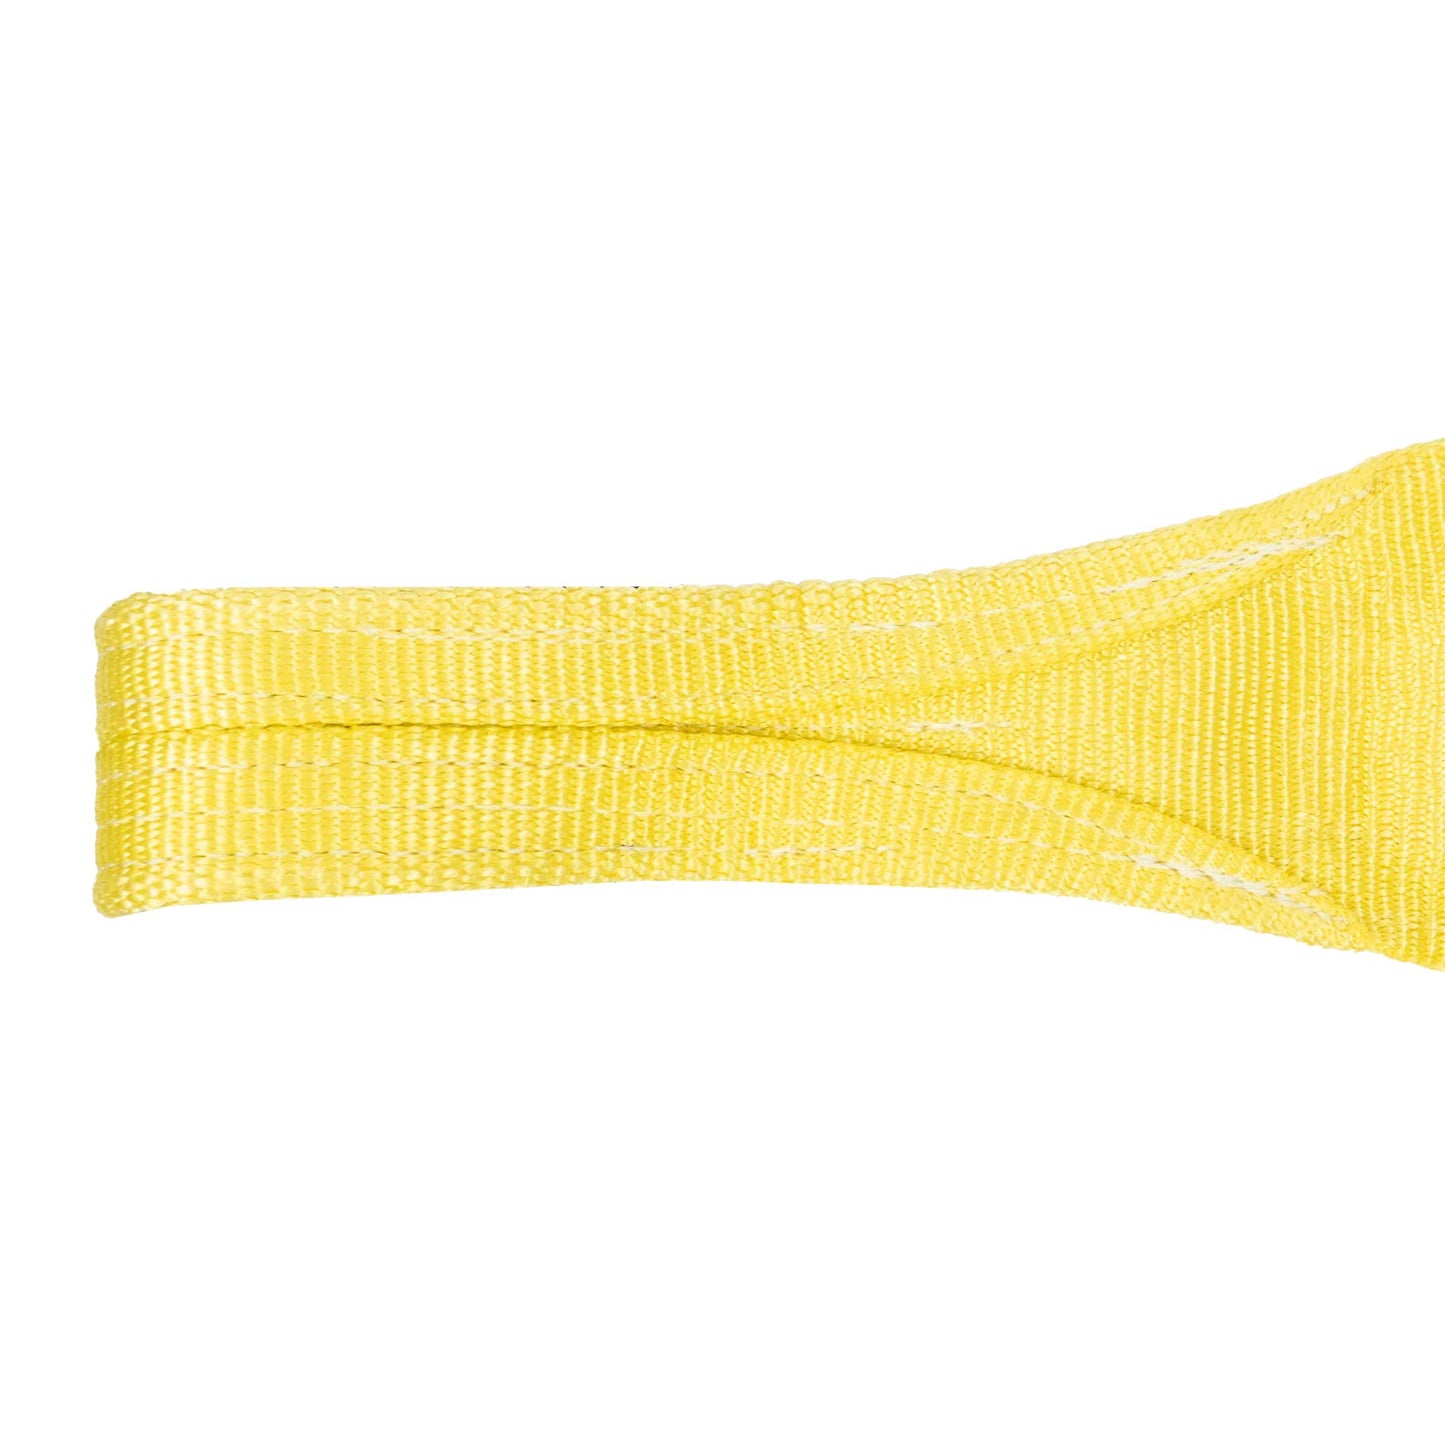 6" x 20' Heavy Duty Recovery Strap with Reinforced Cordura Eyes - 2 Ply | 40,000 WLL